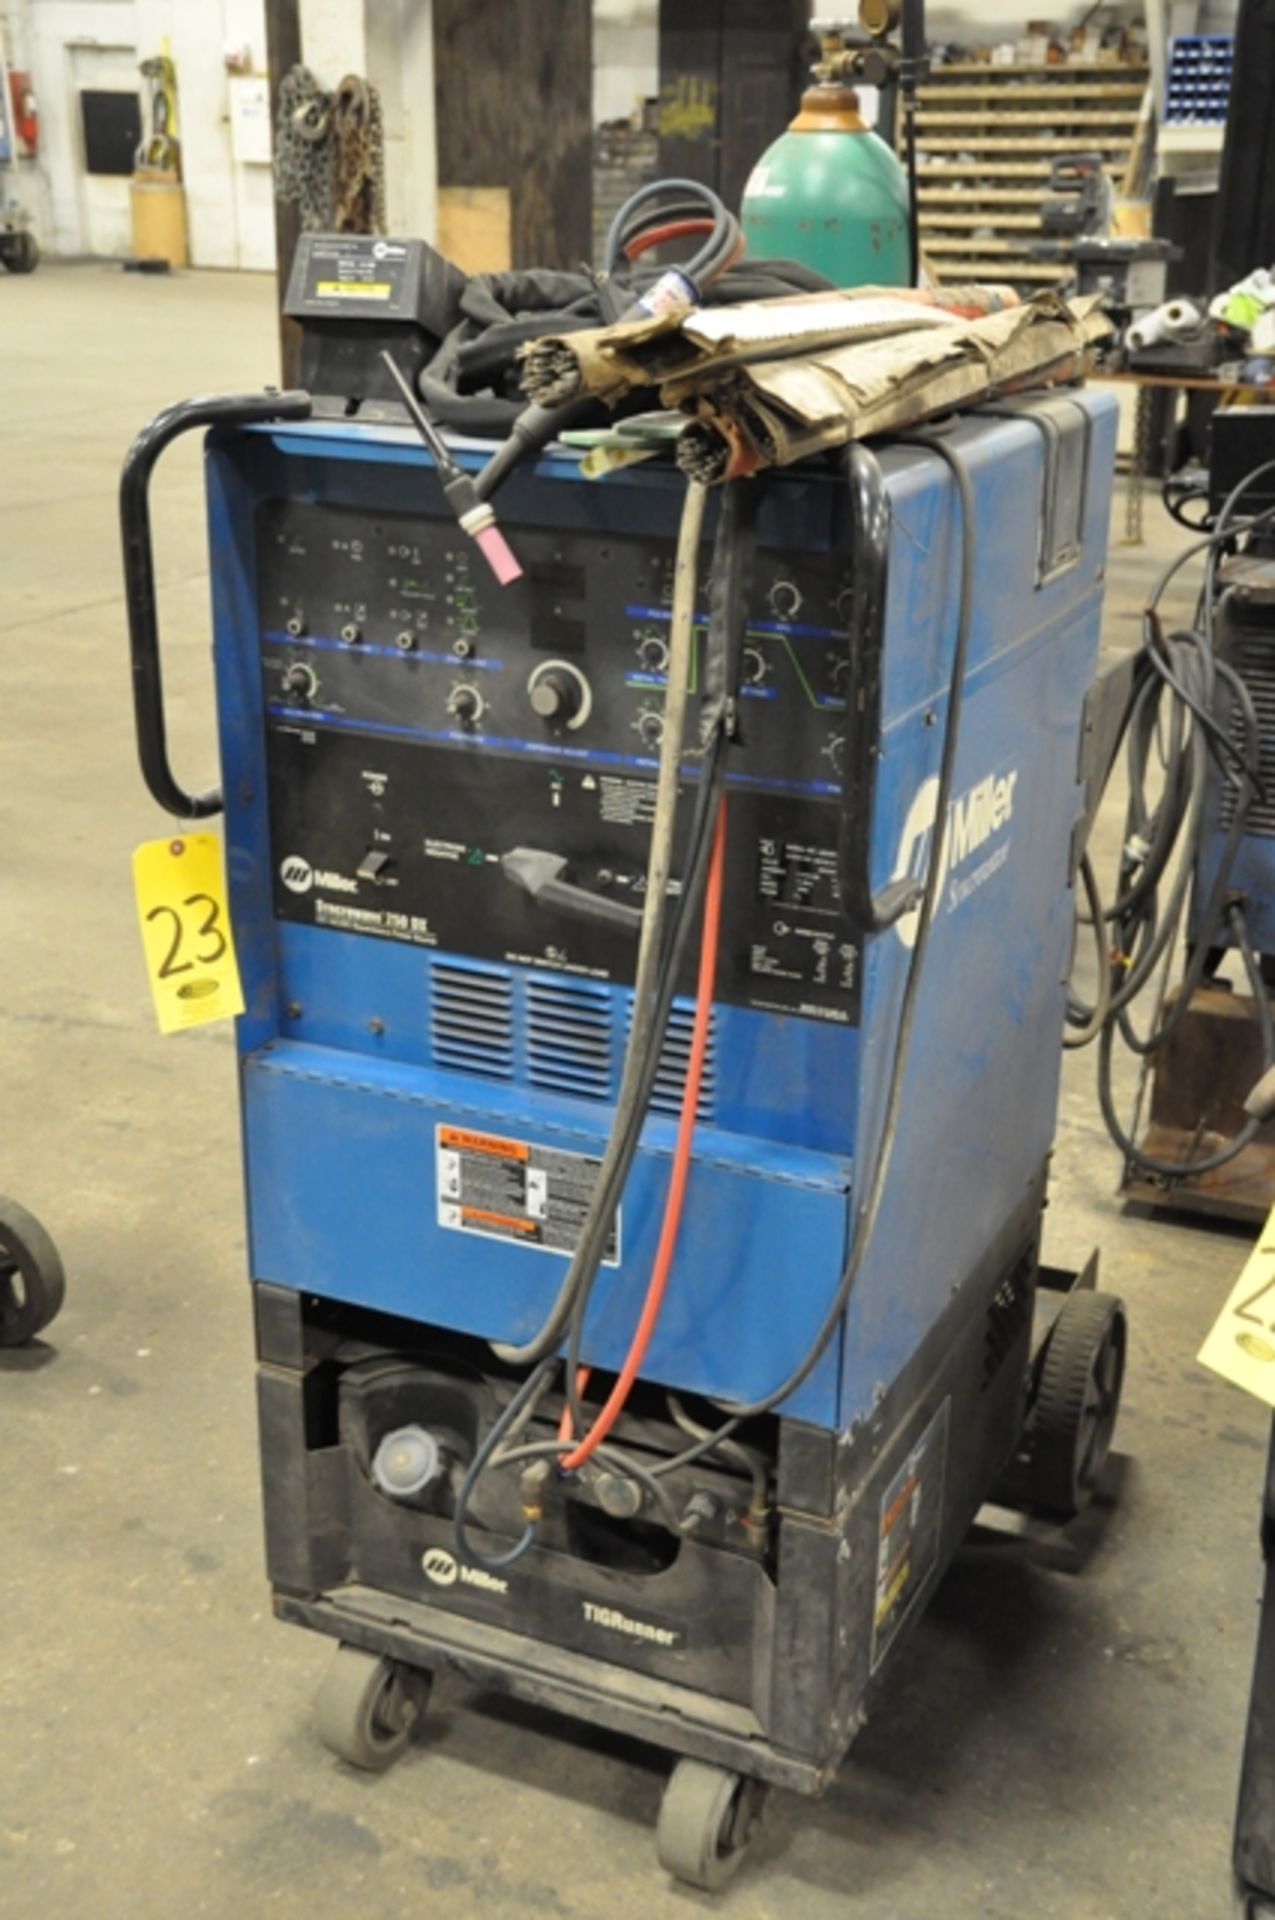 MILLER SYNCRO 250DX TIG WELDER, NEW 2001, SN. LB240786, SINGLE PHASE WITH TIG GUN, WATER COOLER UNIT